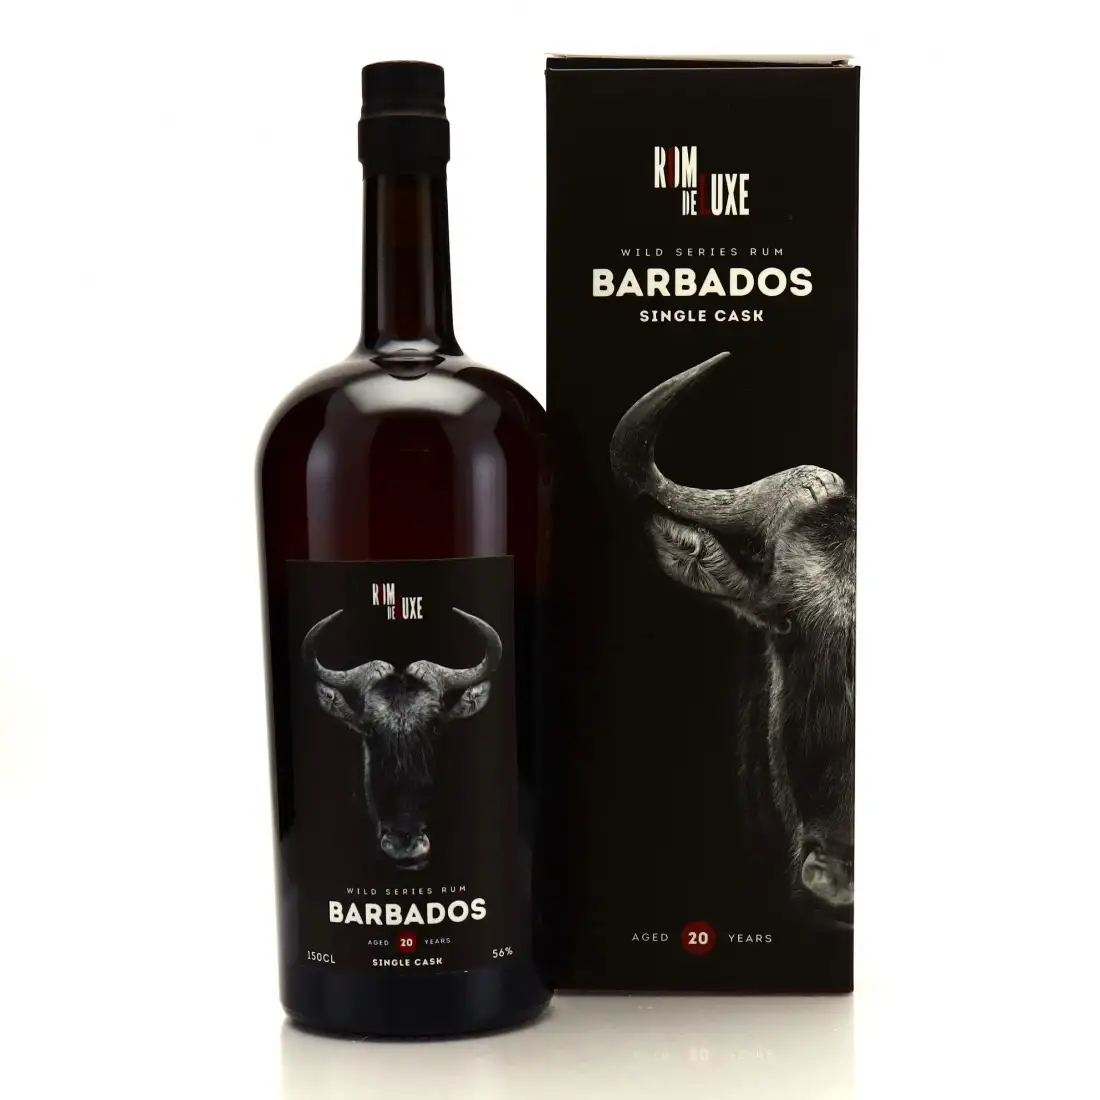 Image of the front of the bottle of the rum Wild Series Rum Barbados No. 22 (Magnum) BMMG